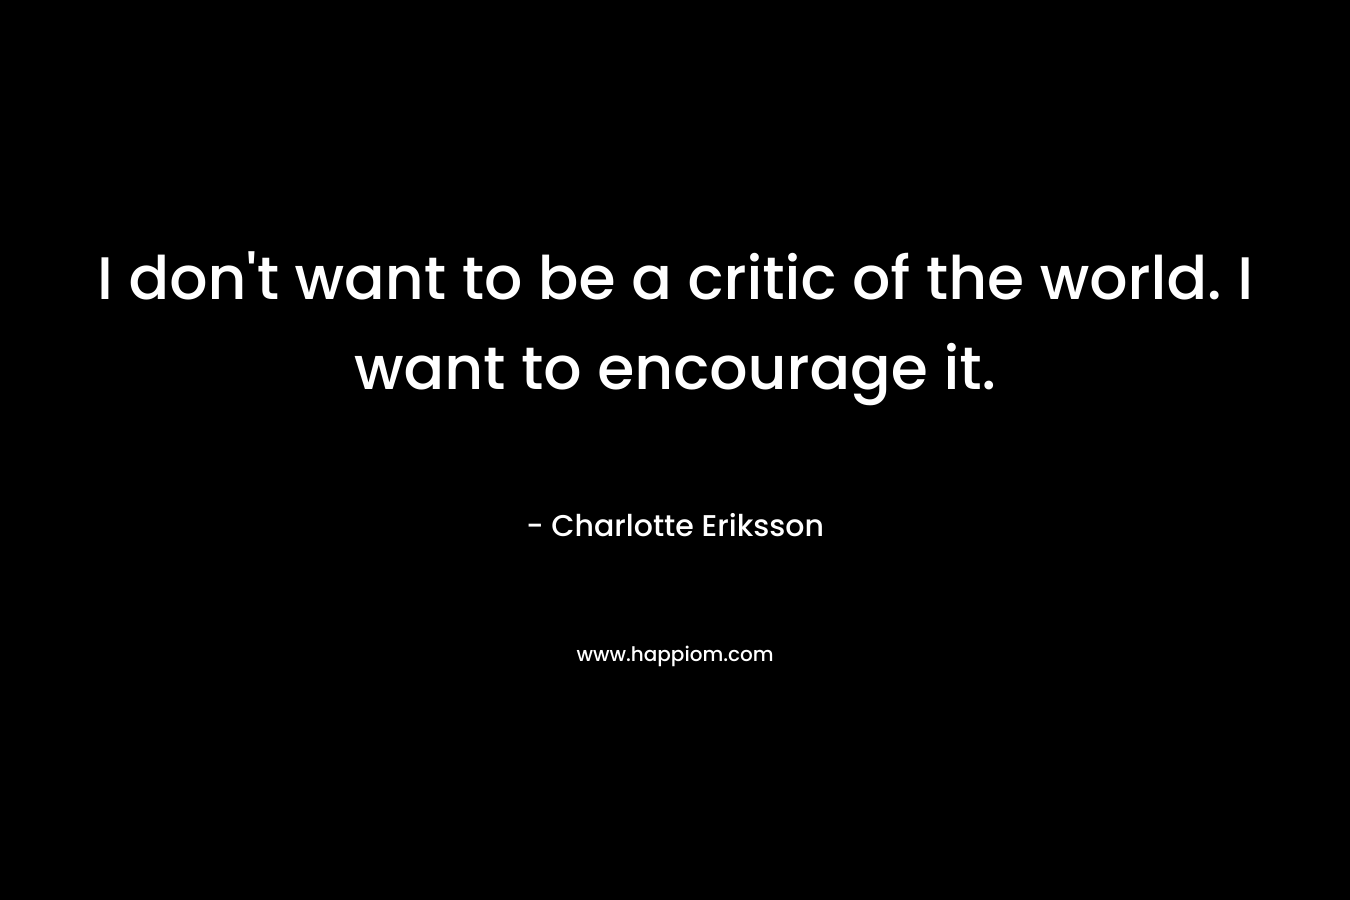 I don't want to be a critic of the world. I want to encourage it.